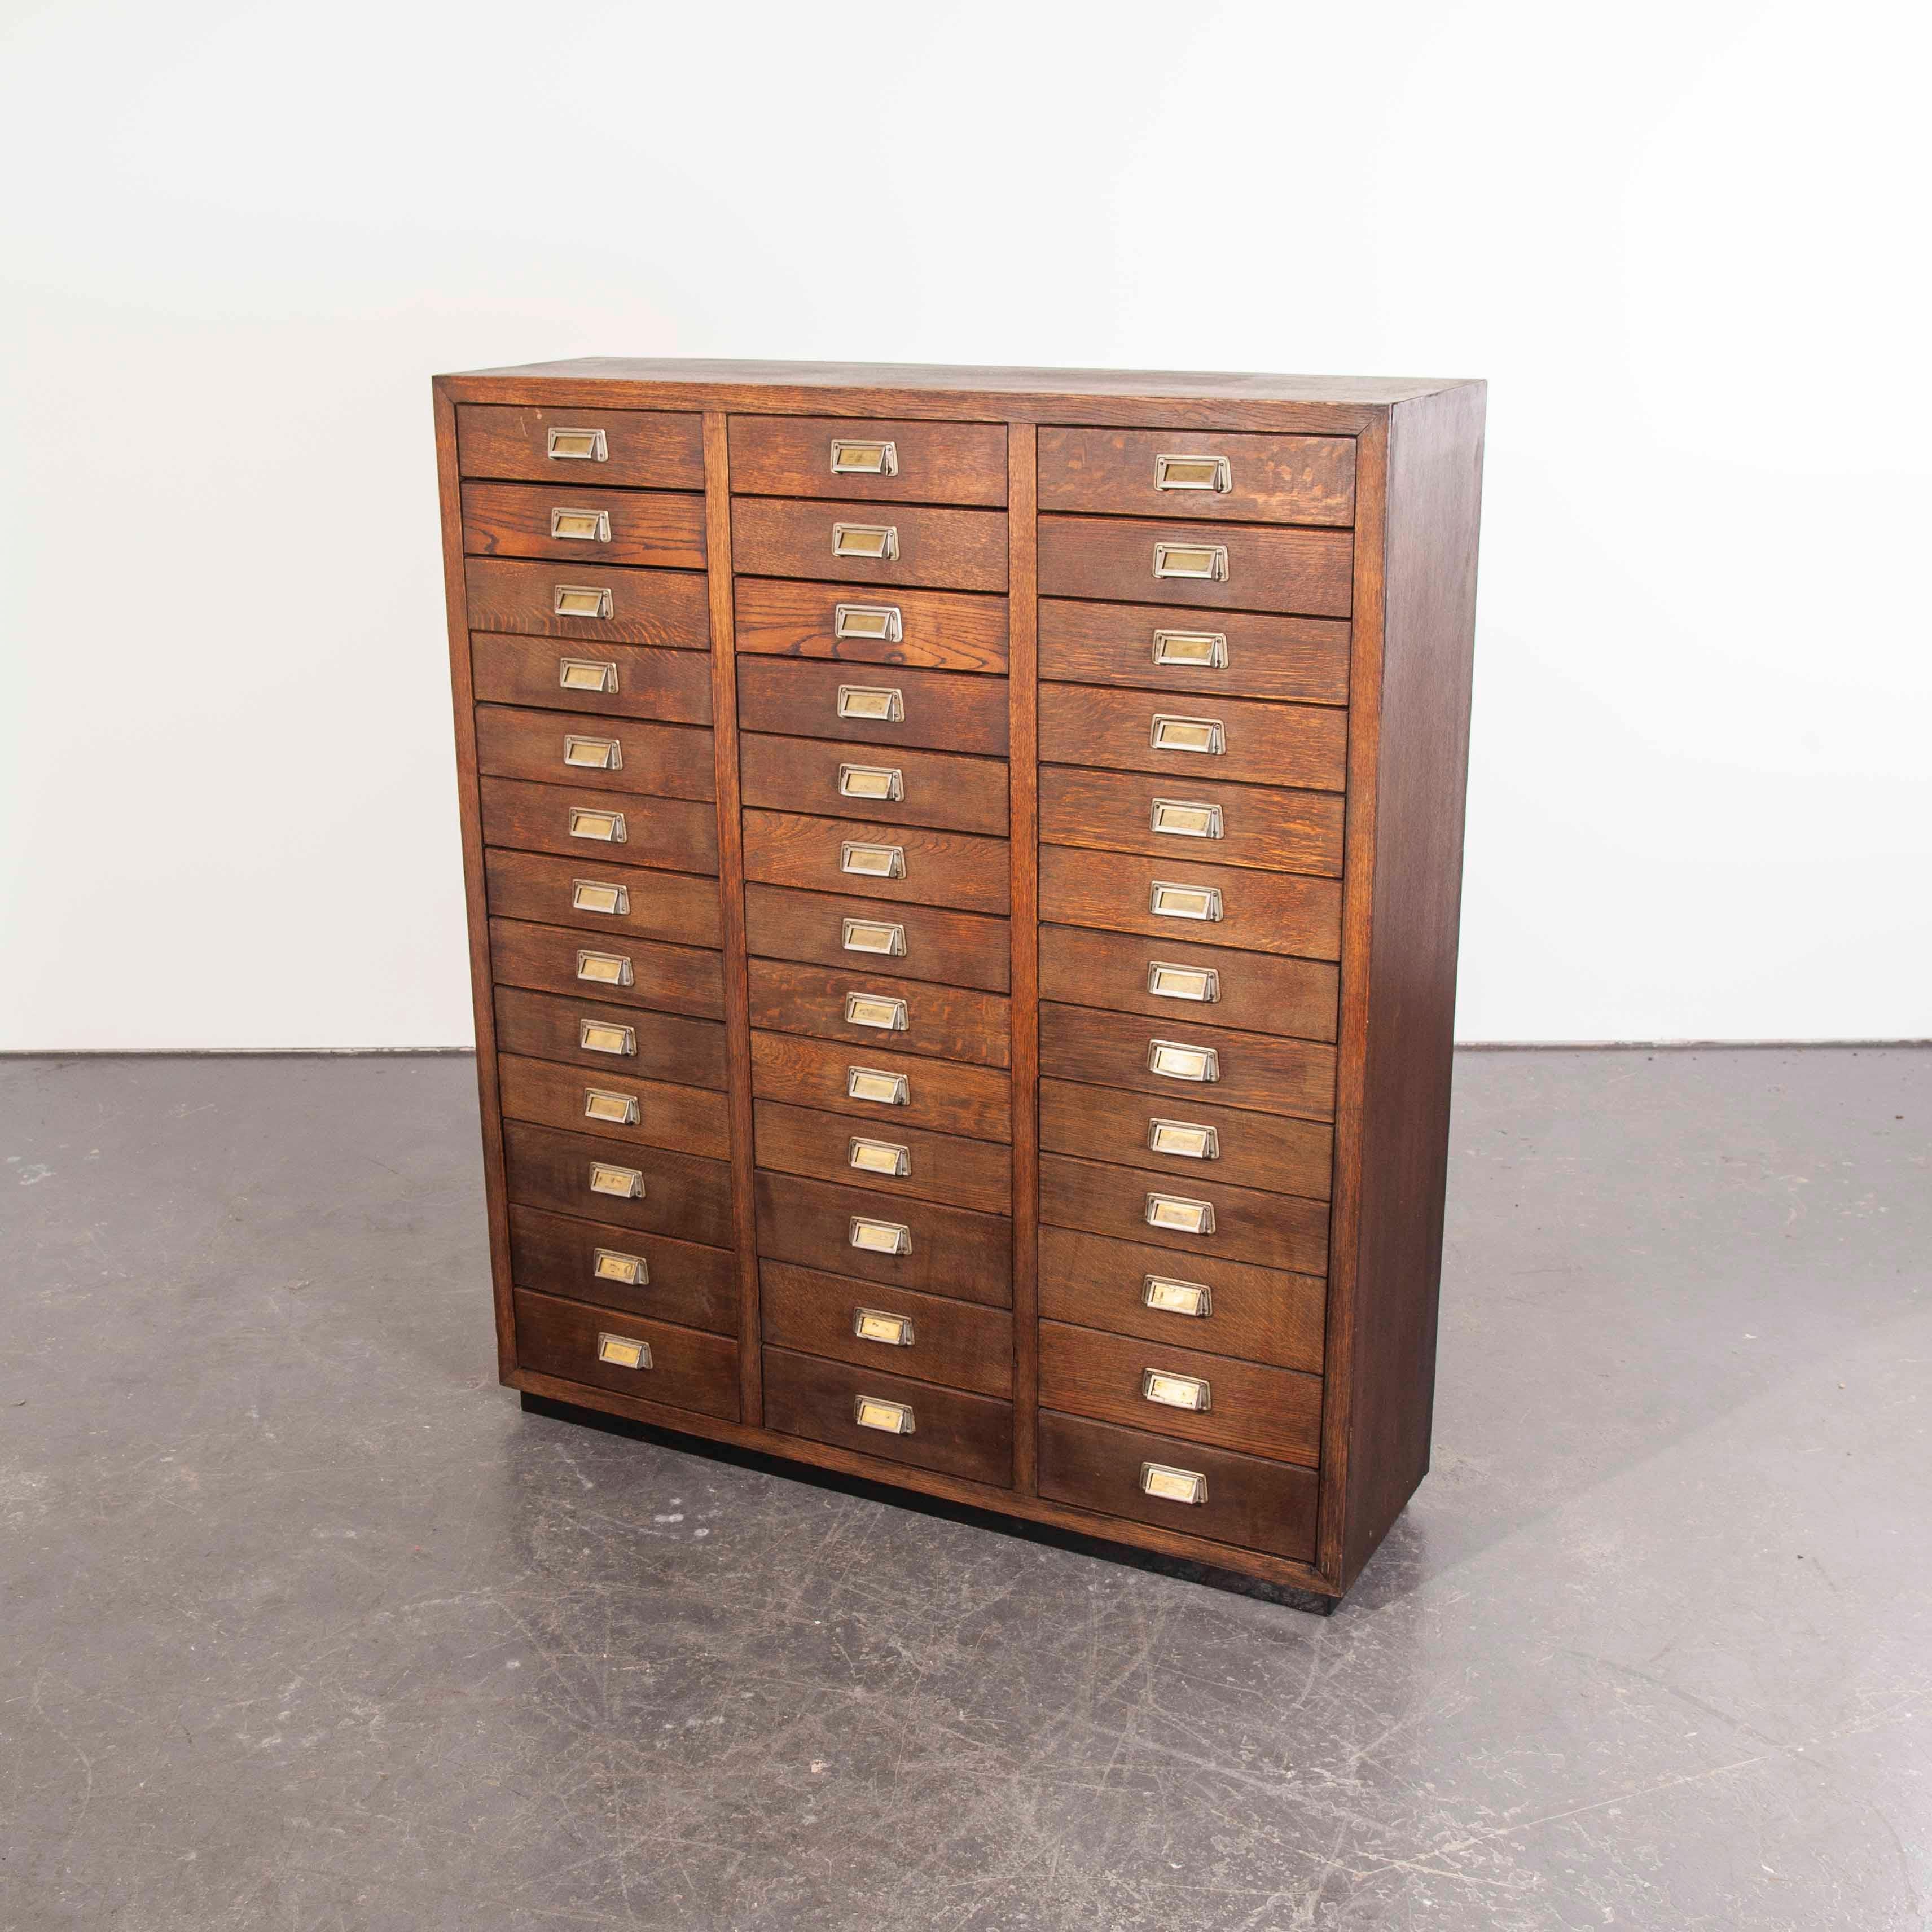 1950s Oak Apothecary Multi Drawer Chest of Drawers, Thirty Nine Drawers 15